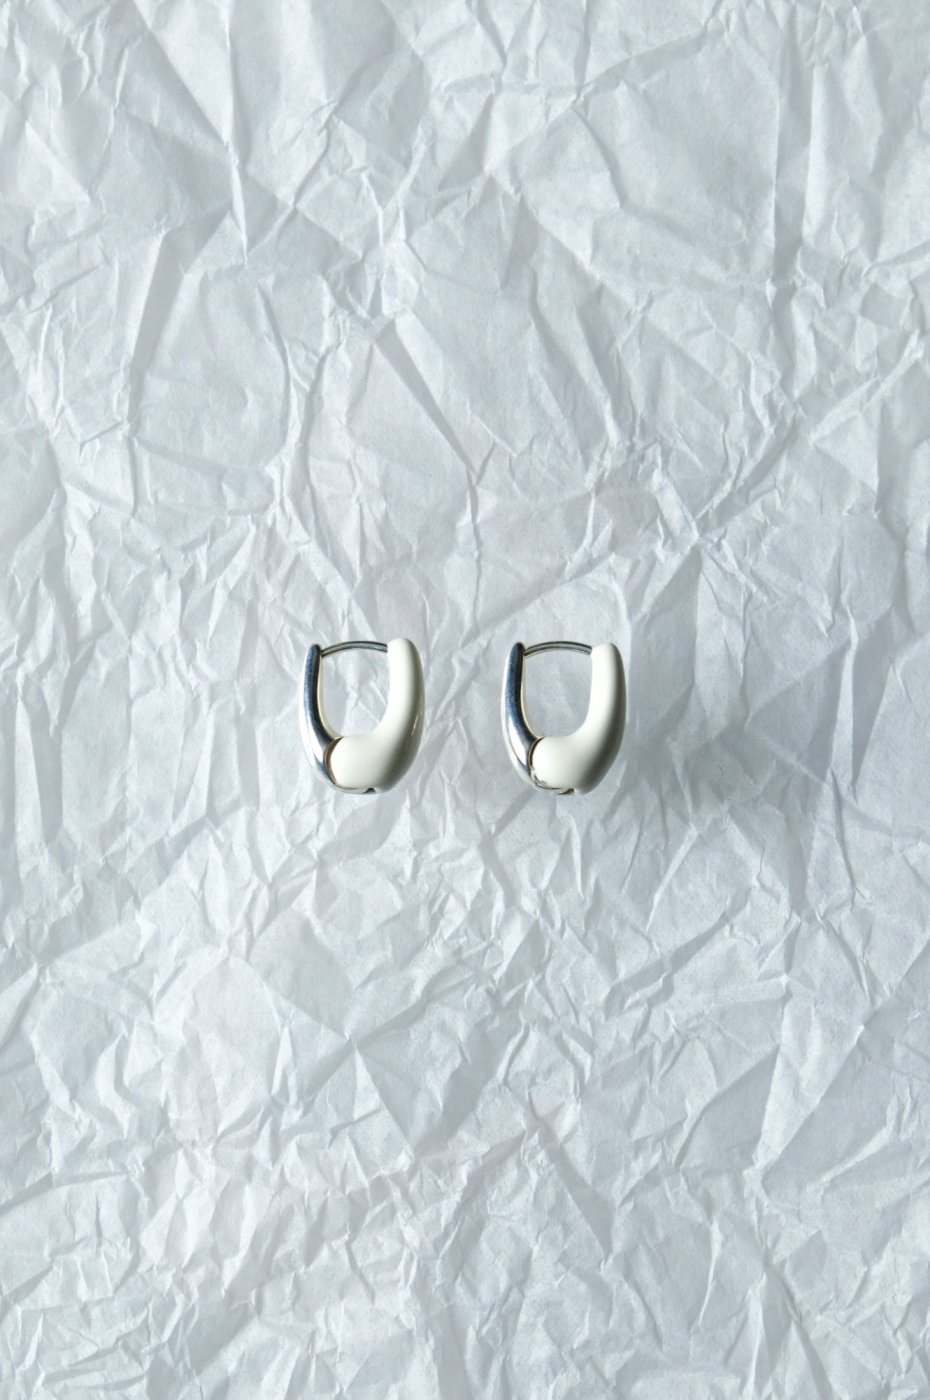 R.ALAGAN 饬-DIPPED TINY TINY PUFFY HOOPS SILVERLIGHT YELLOW-